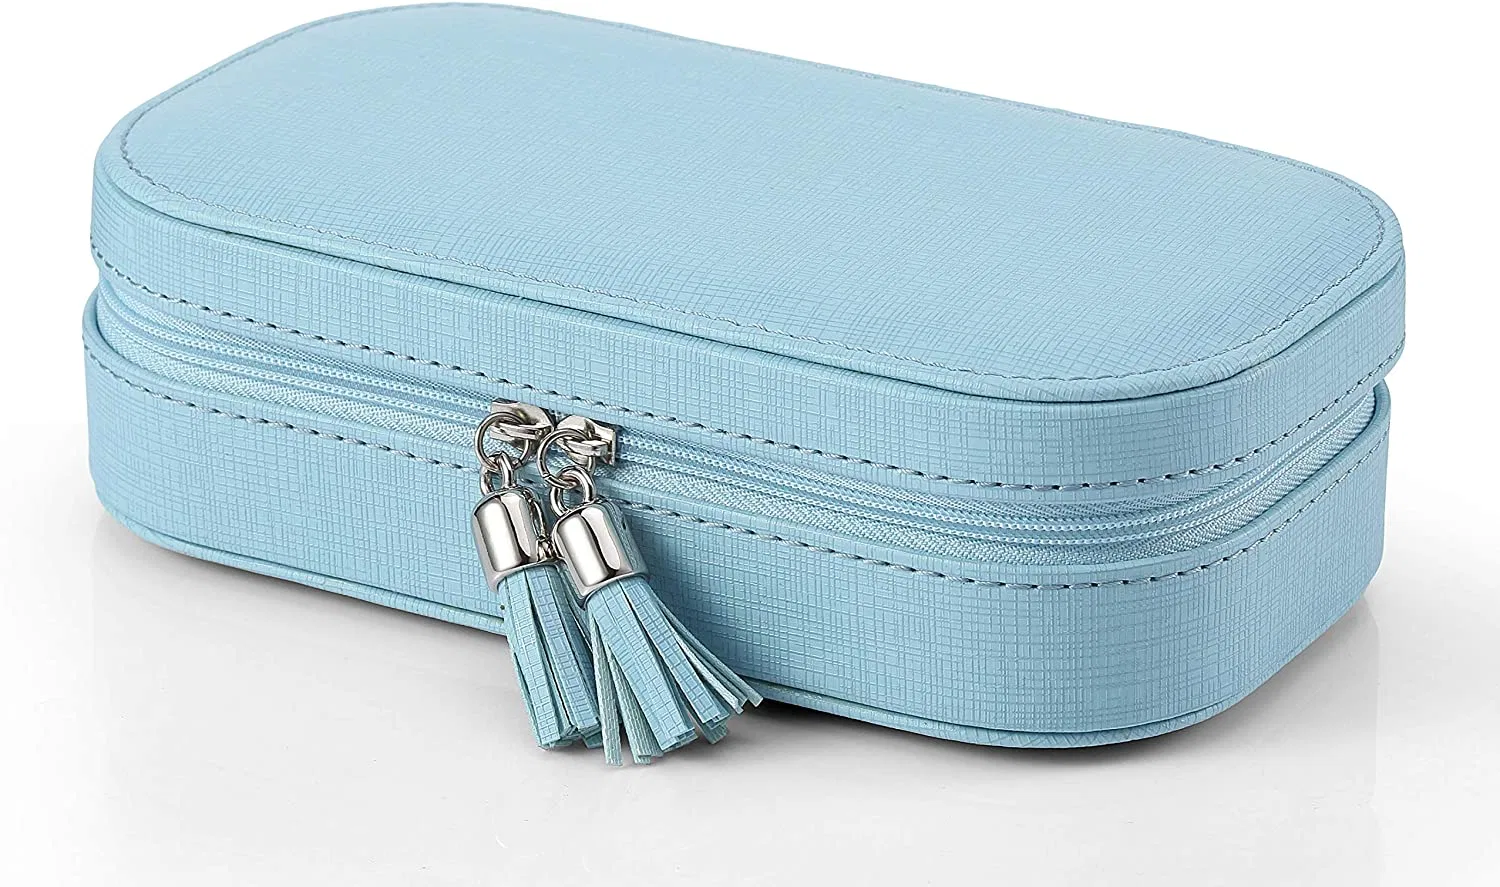 PU Leather Fashion Small Tassels Travel Accessories Jewelry Box/Bag for Gift Box Packing